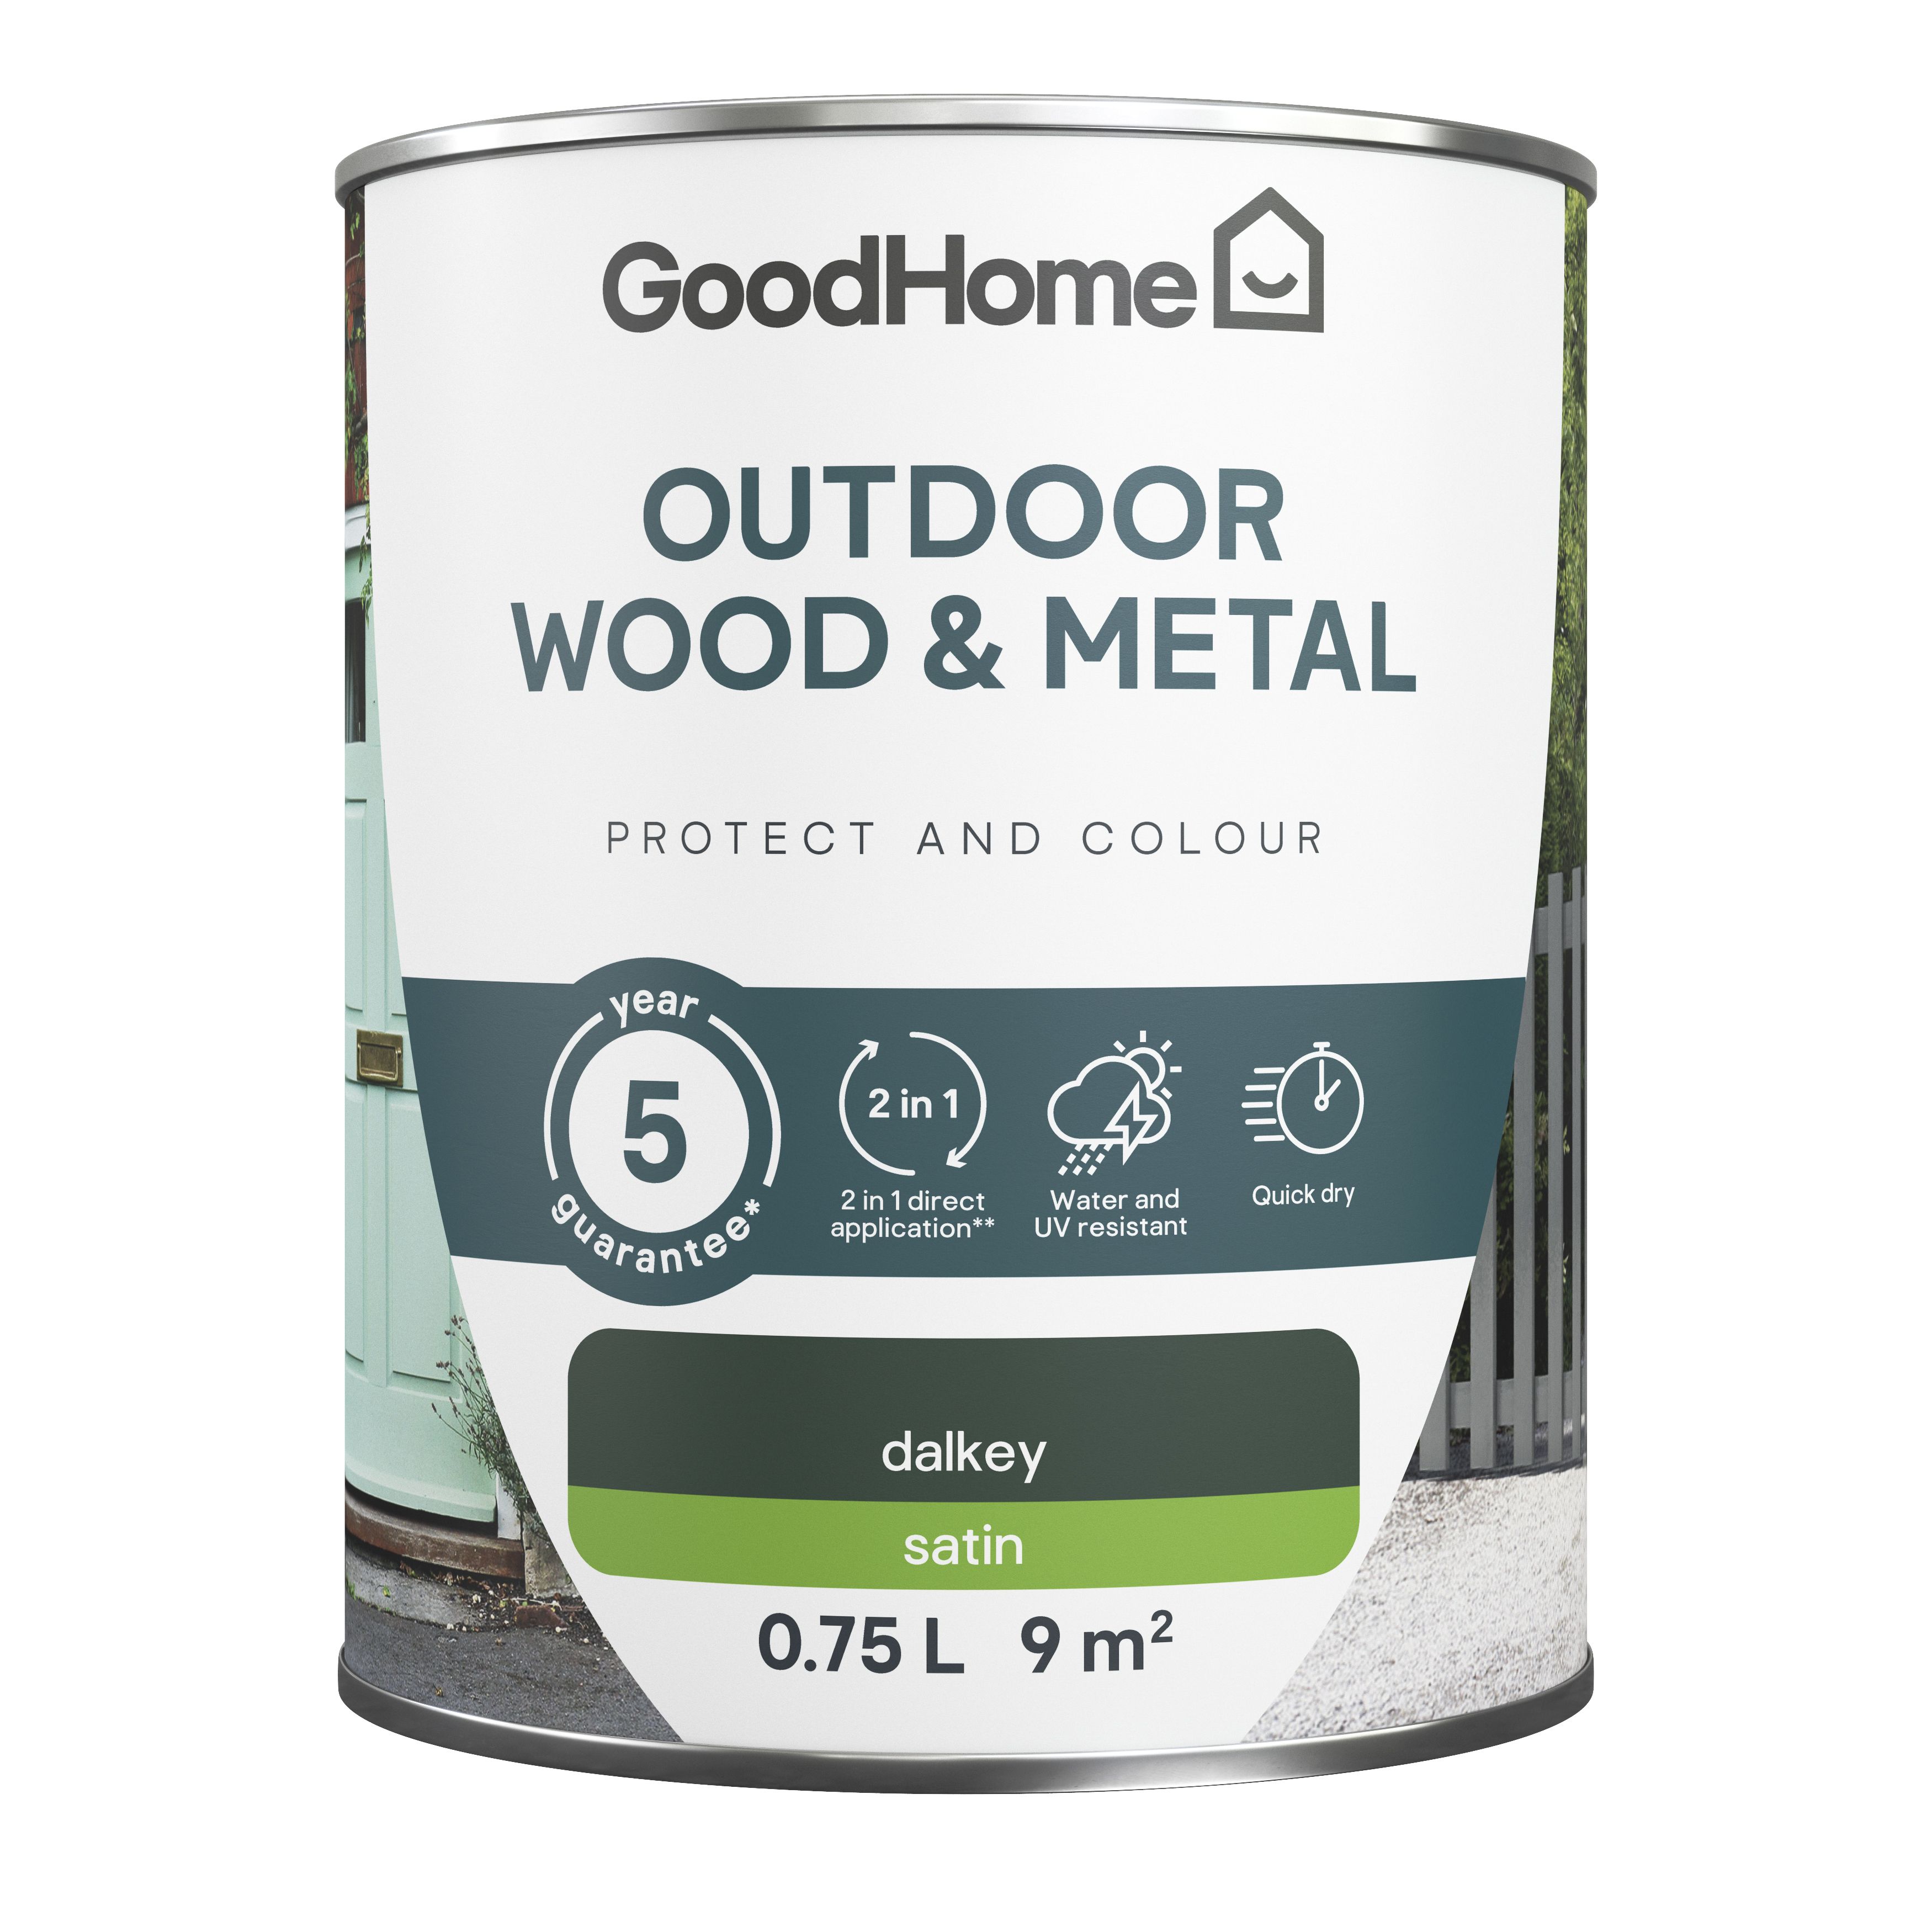 GoodHome Outdoor Dalkey Satinwood Multi-surface paint, 750ml